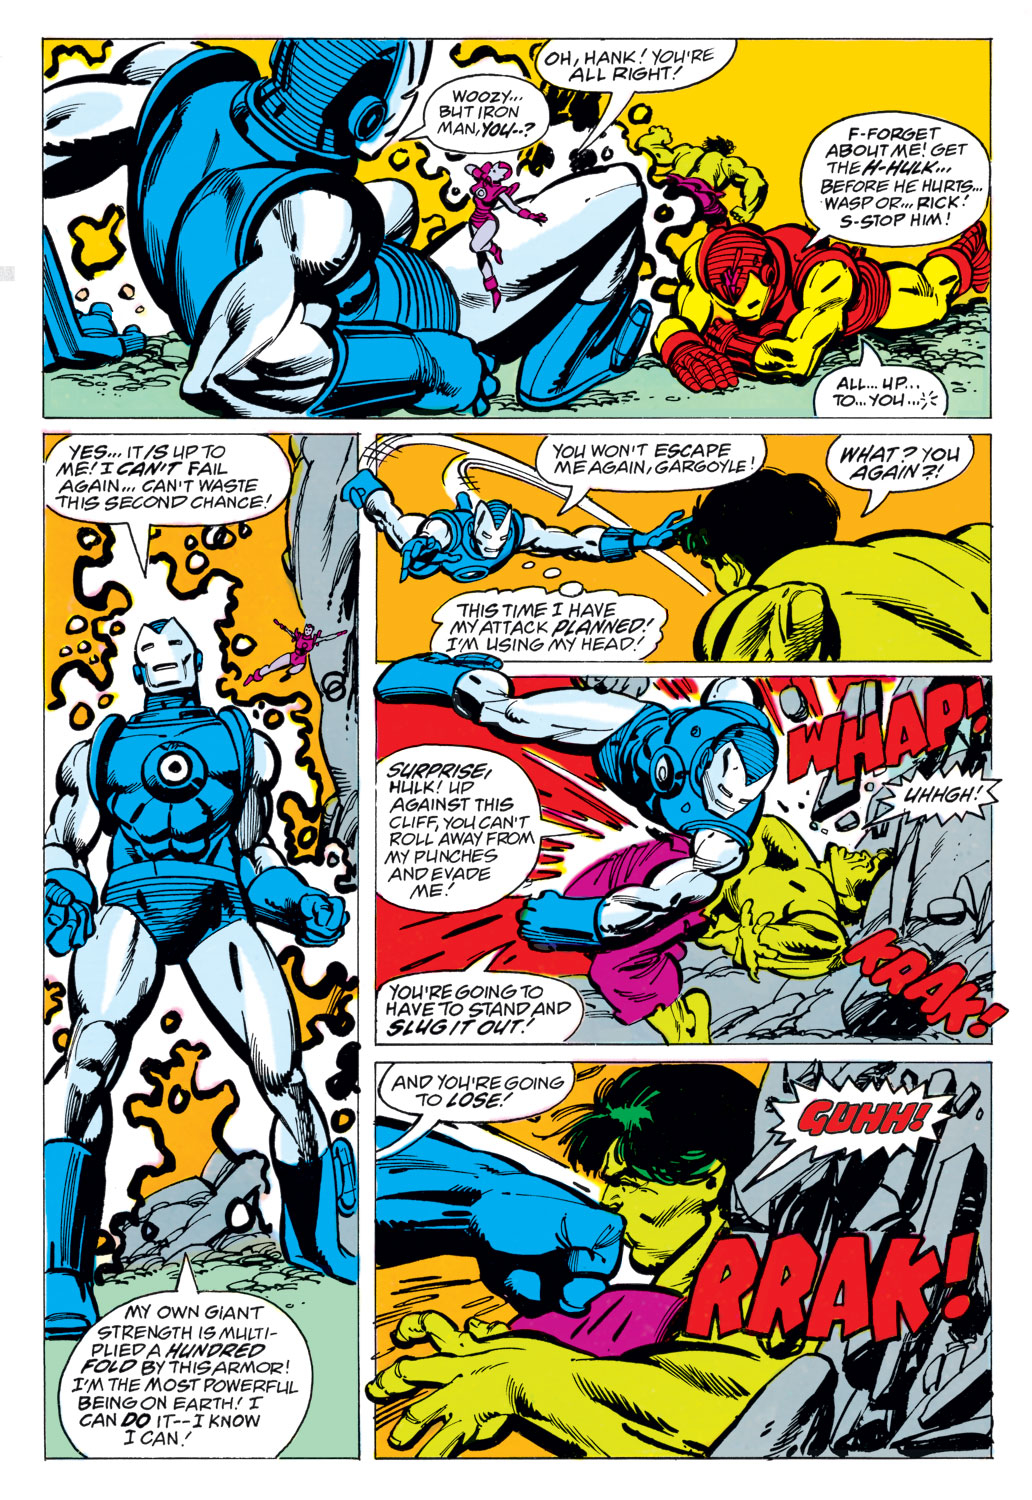 What If? (1977) issue 3 - The Avengers had never been - Page 31